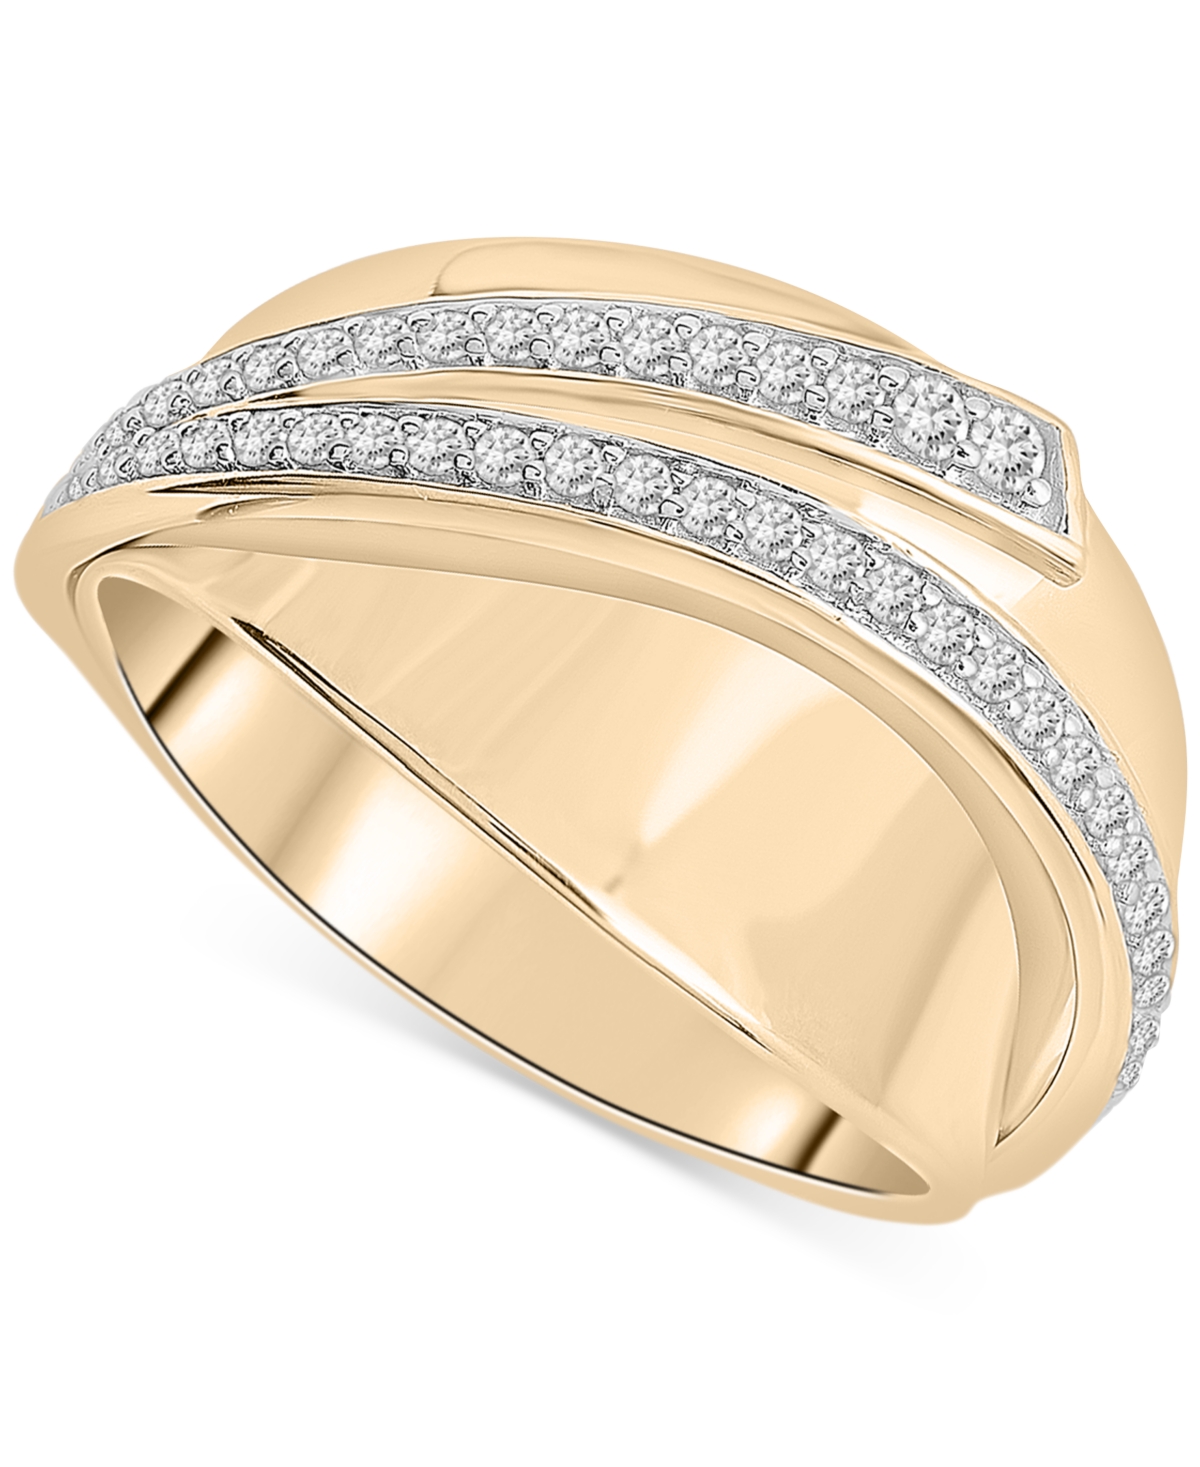 Diamond Swirl Statement Ring (1/4 ct. t.w.) in Gold Vermeil, Created for Macy's - Gold Vermeil